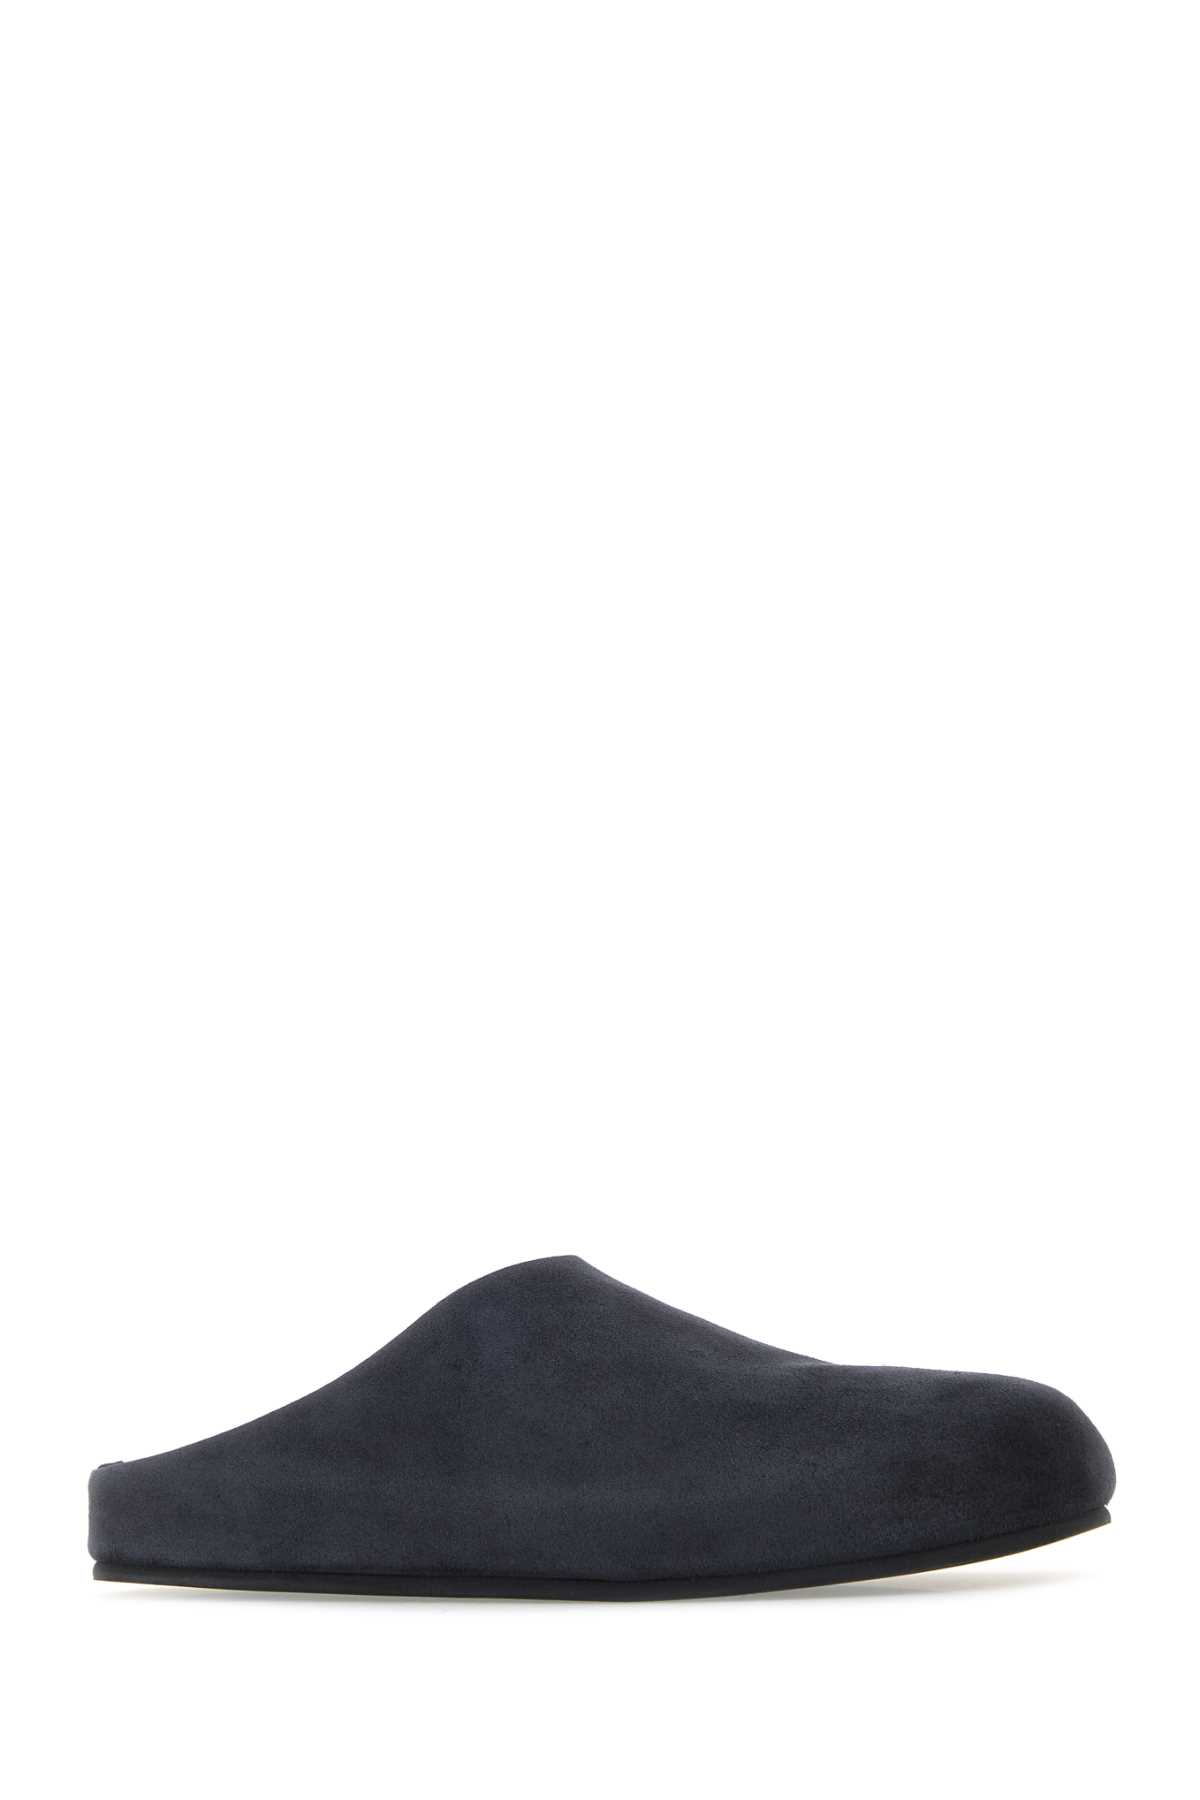 THE ROW MIDNIGHT BLUE SUEDE HUGO SLIPPERS